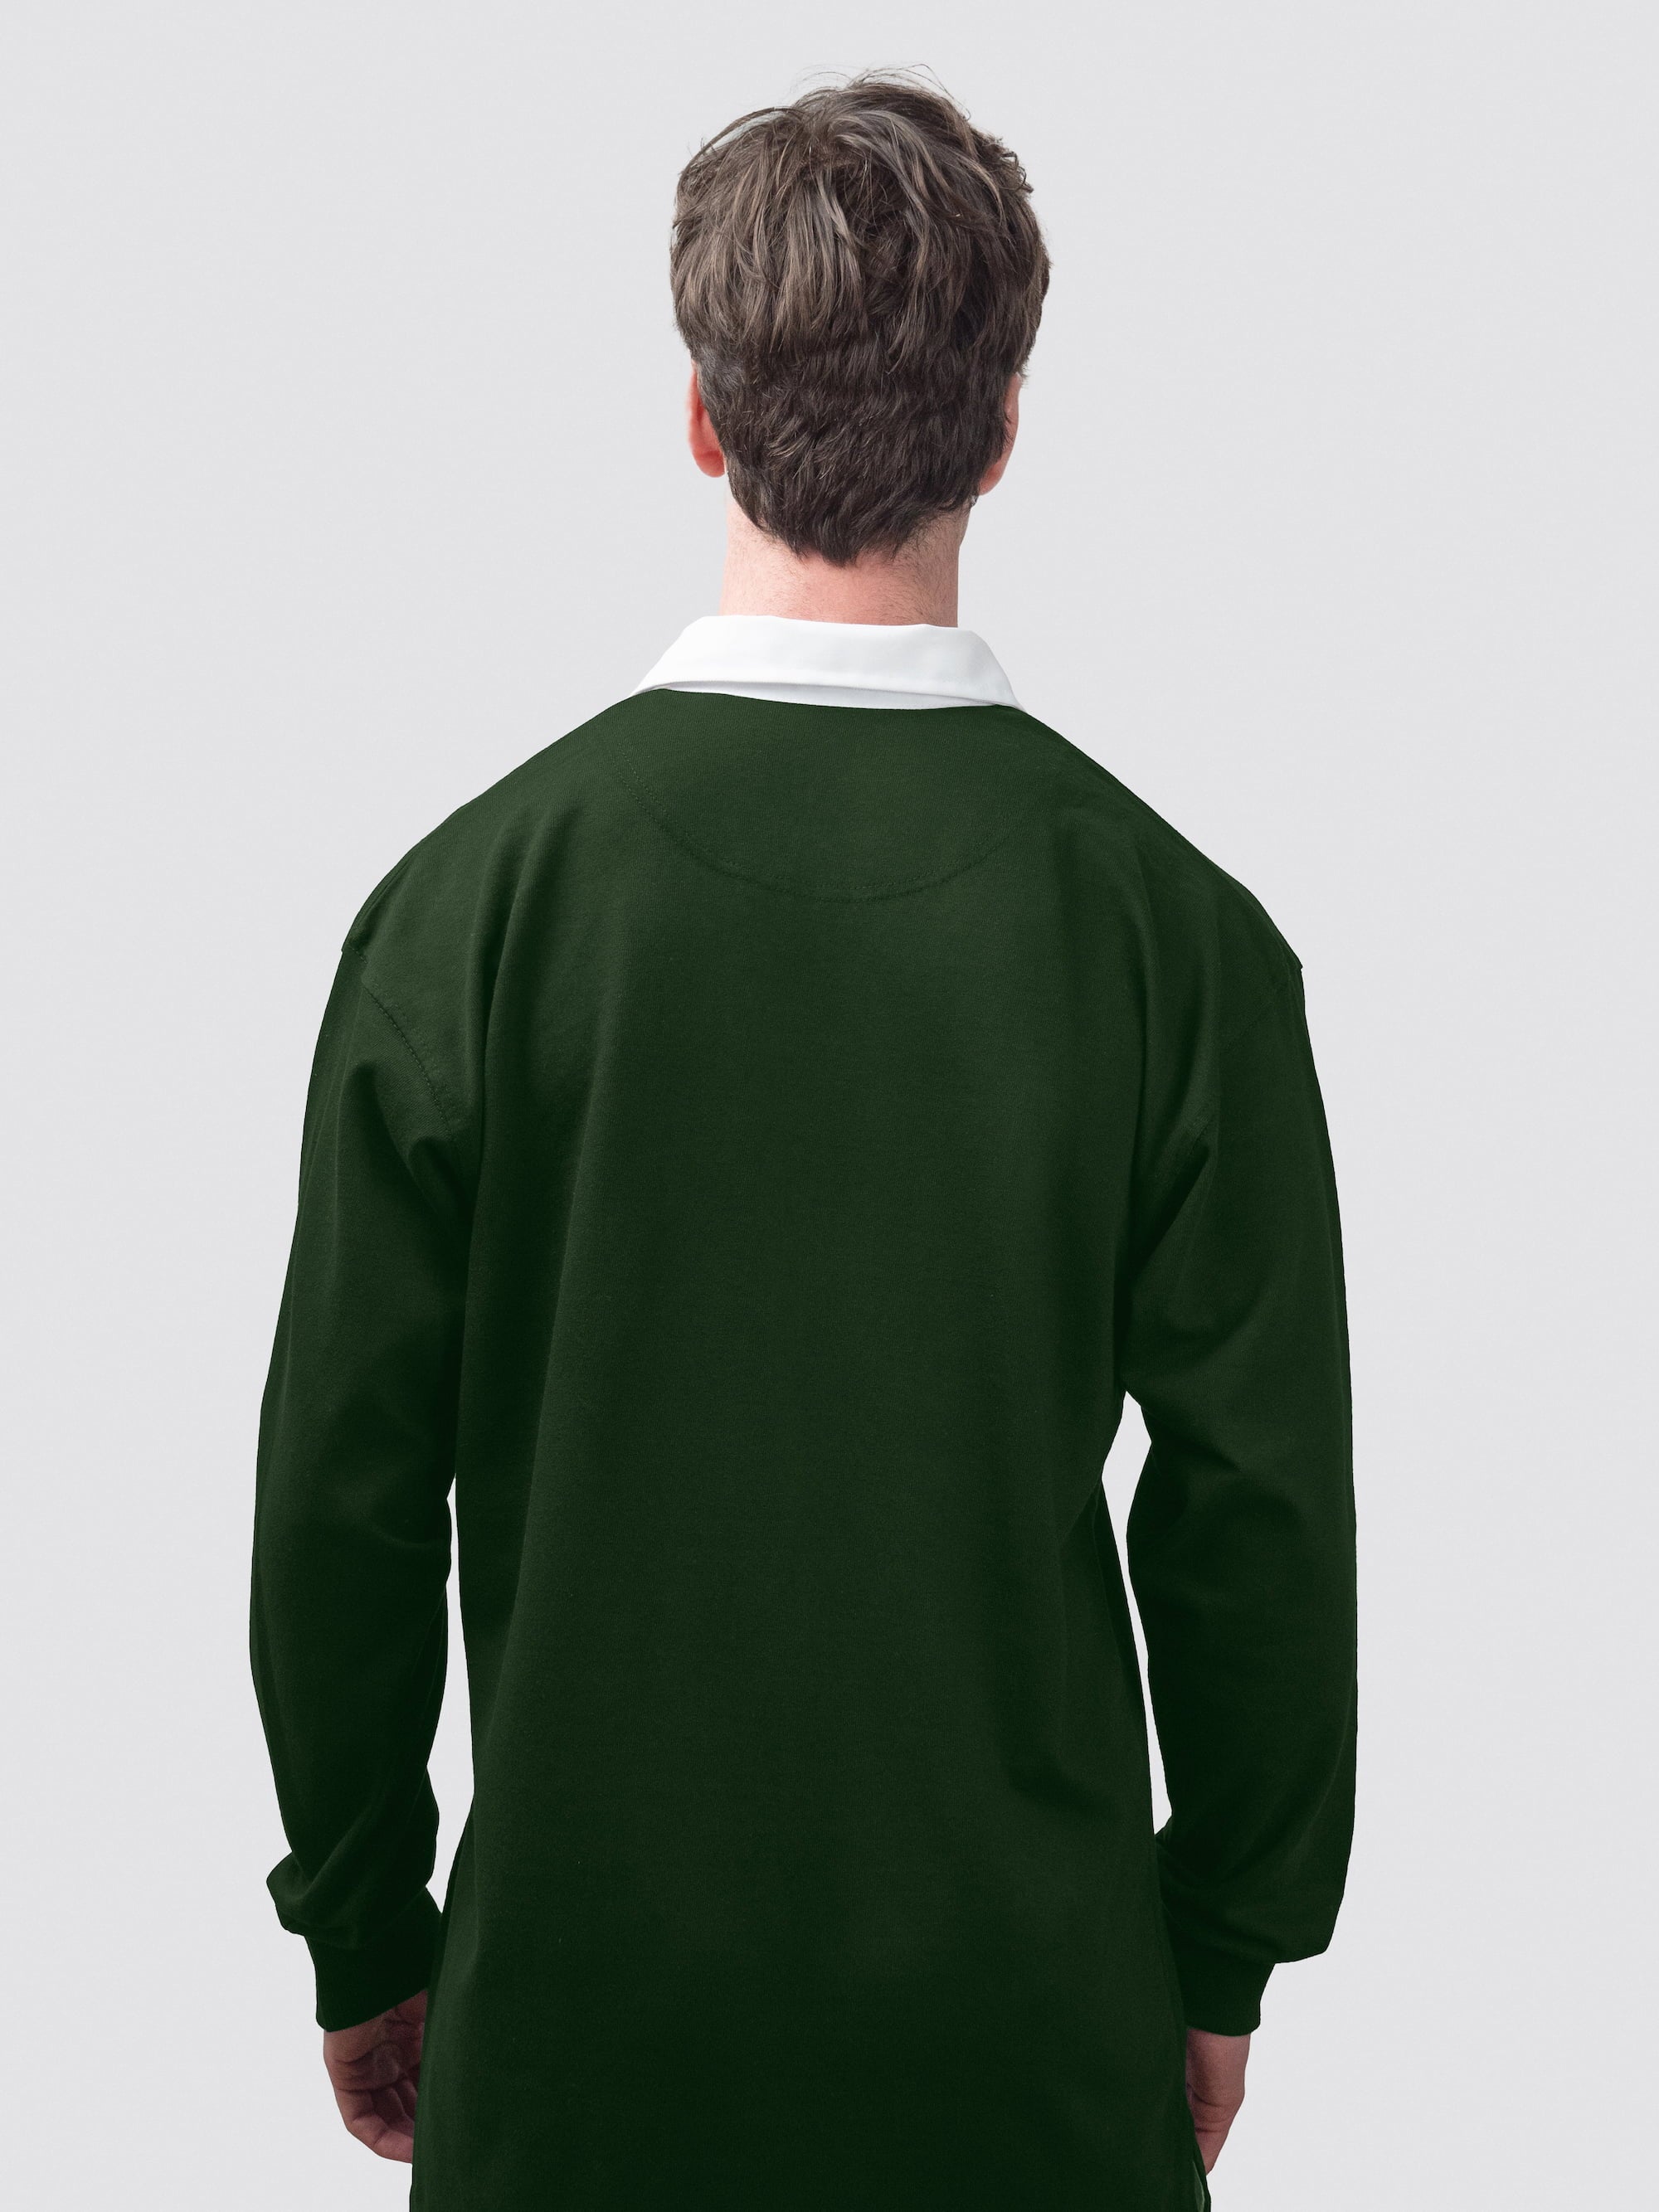 Classic fit, Durham University rugby shirt in Bottle Green